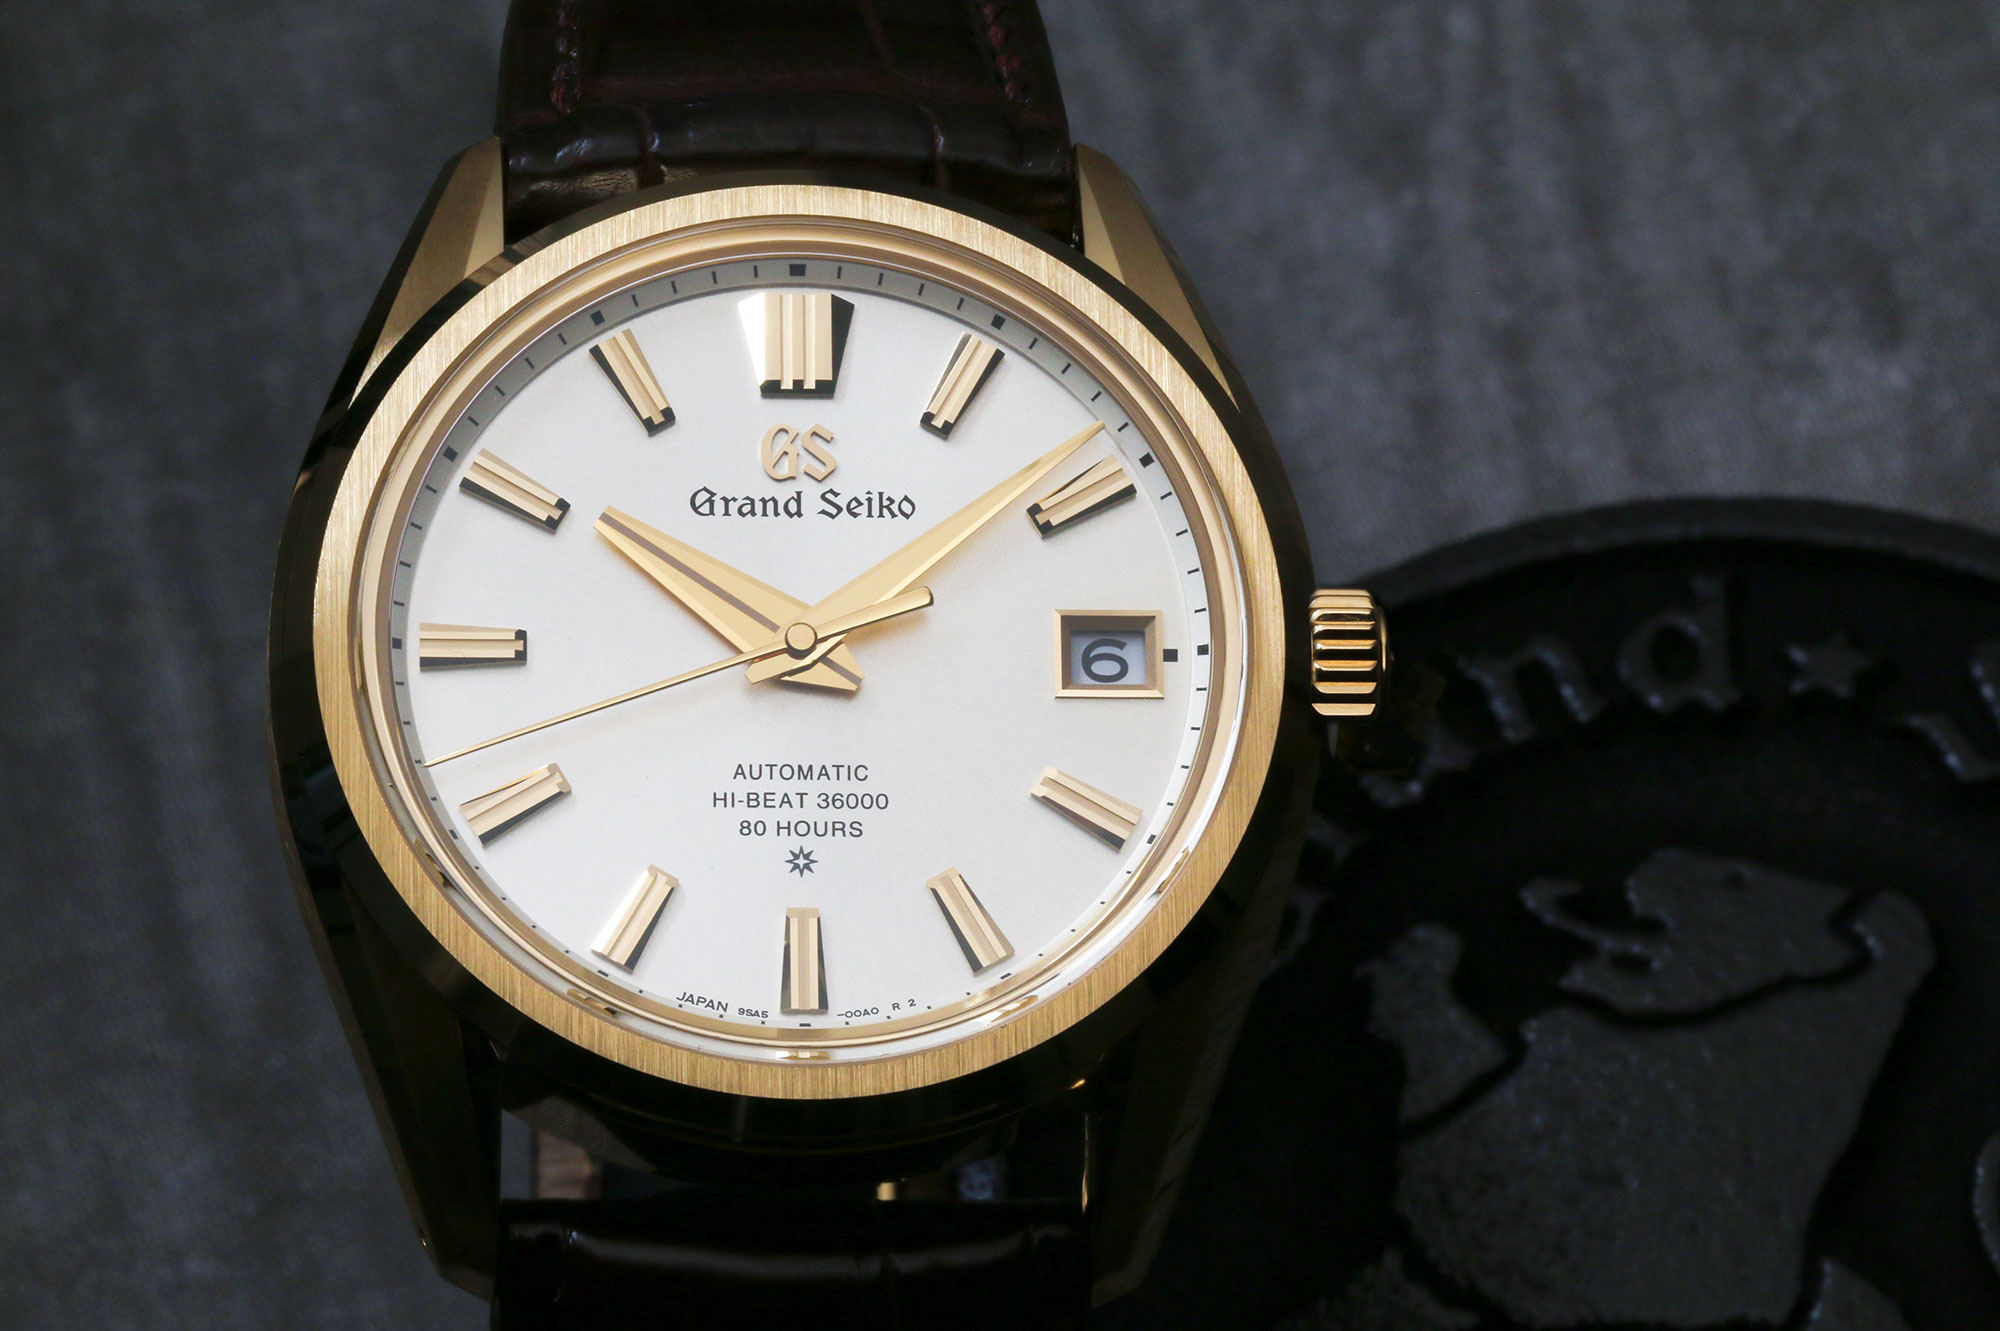 Grand Seiko SLGH002 with a gold case and light dial.